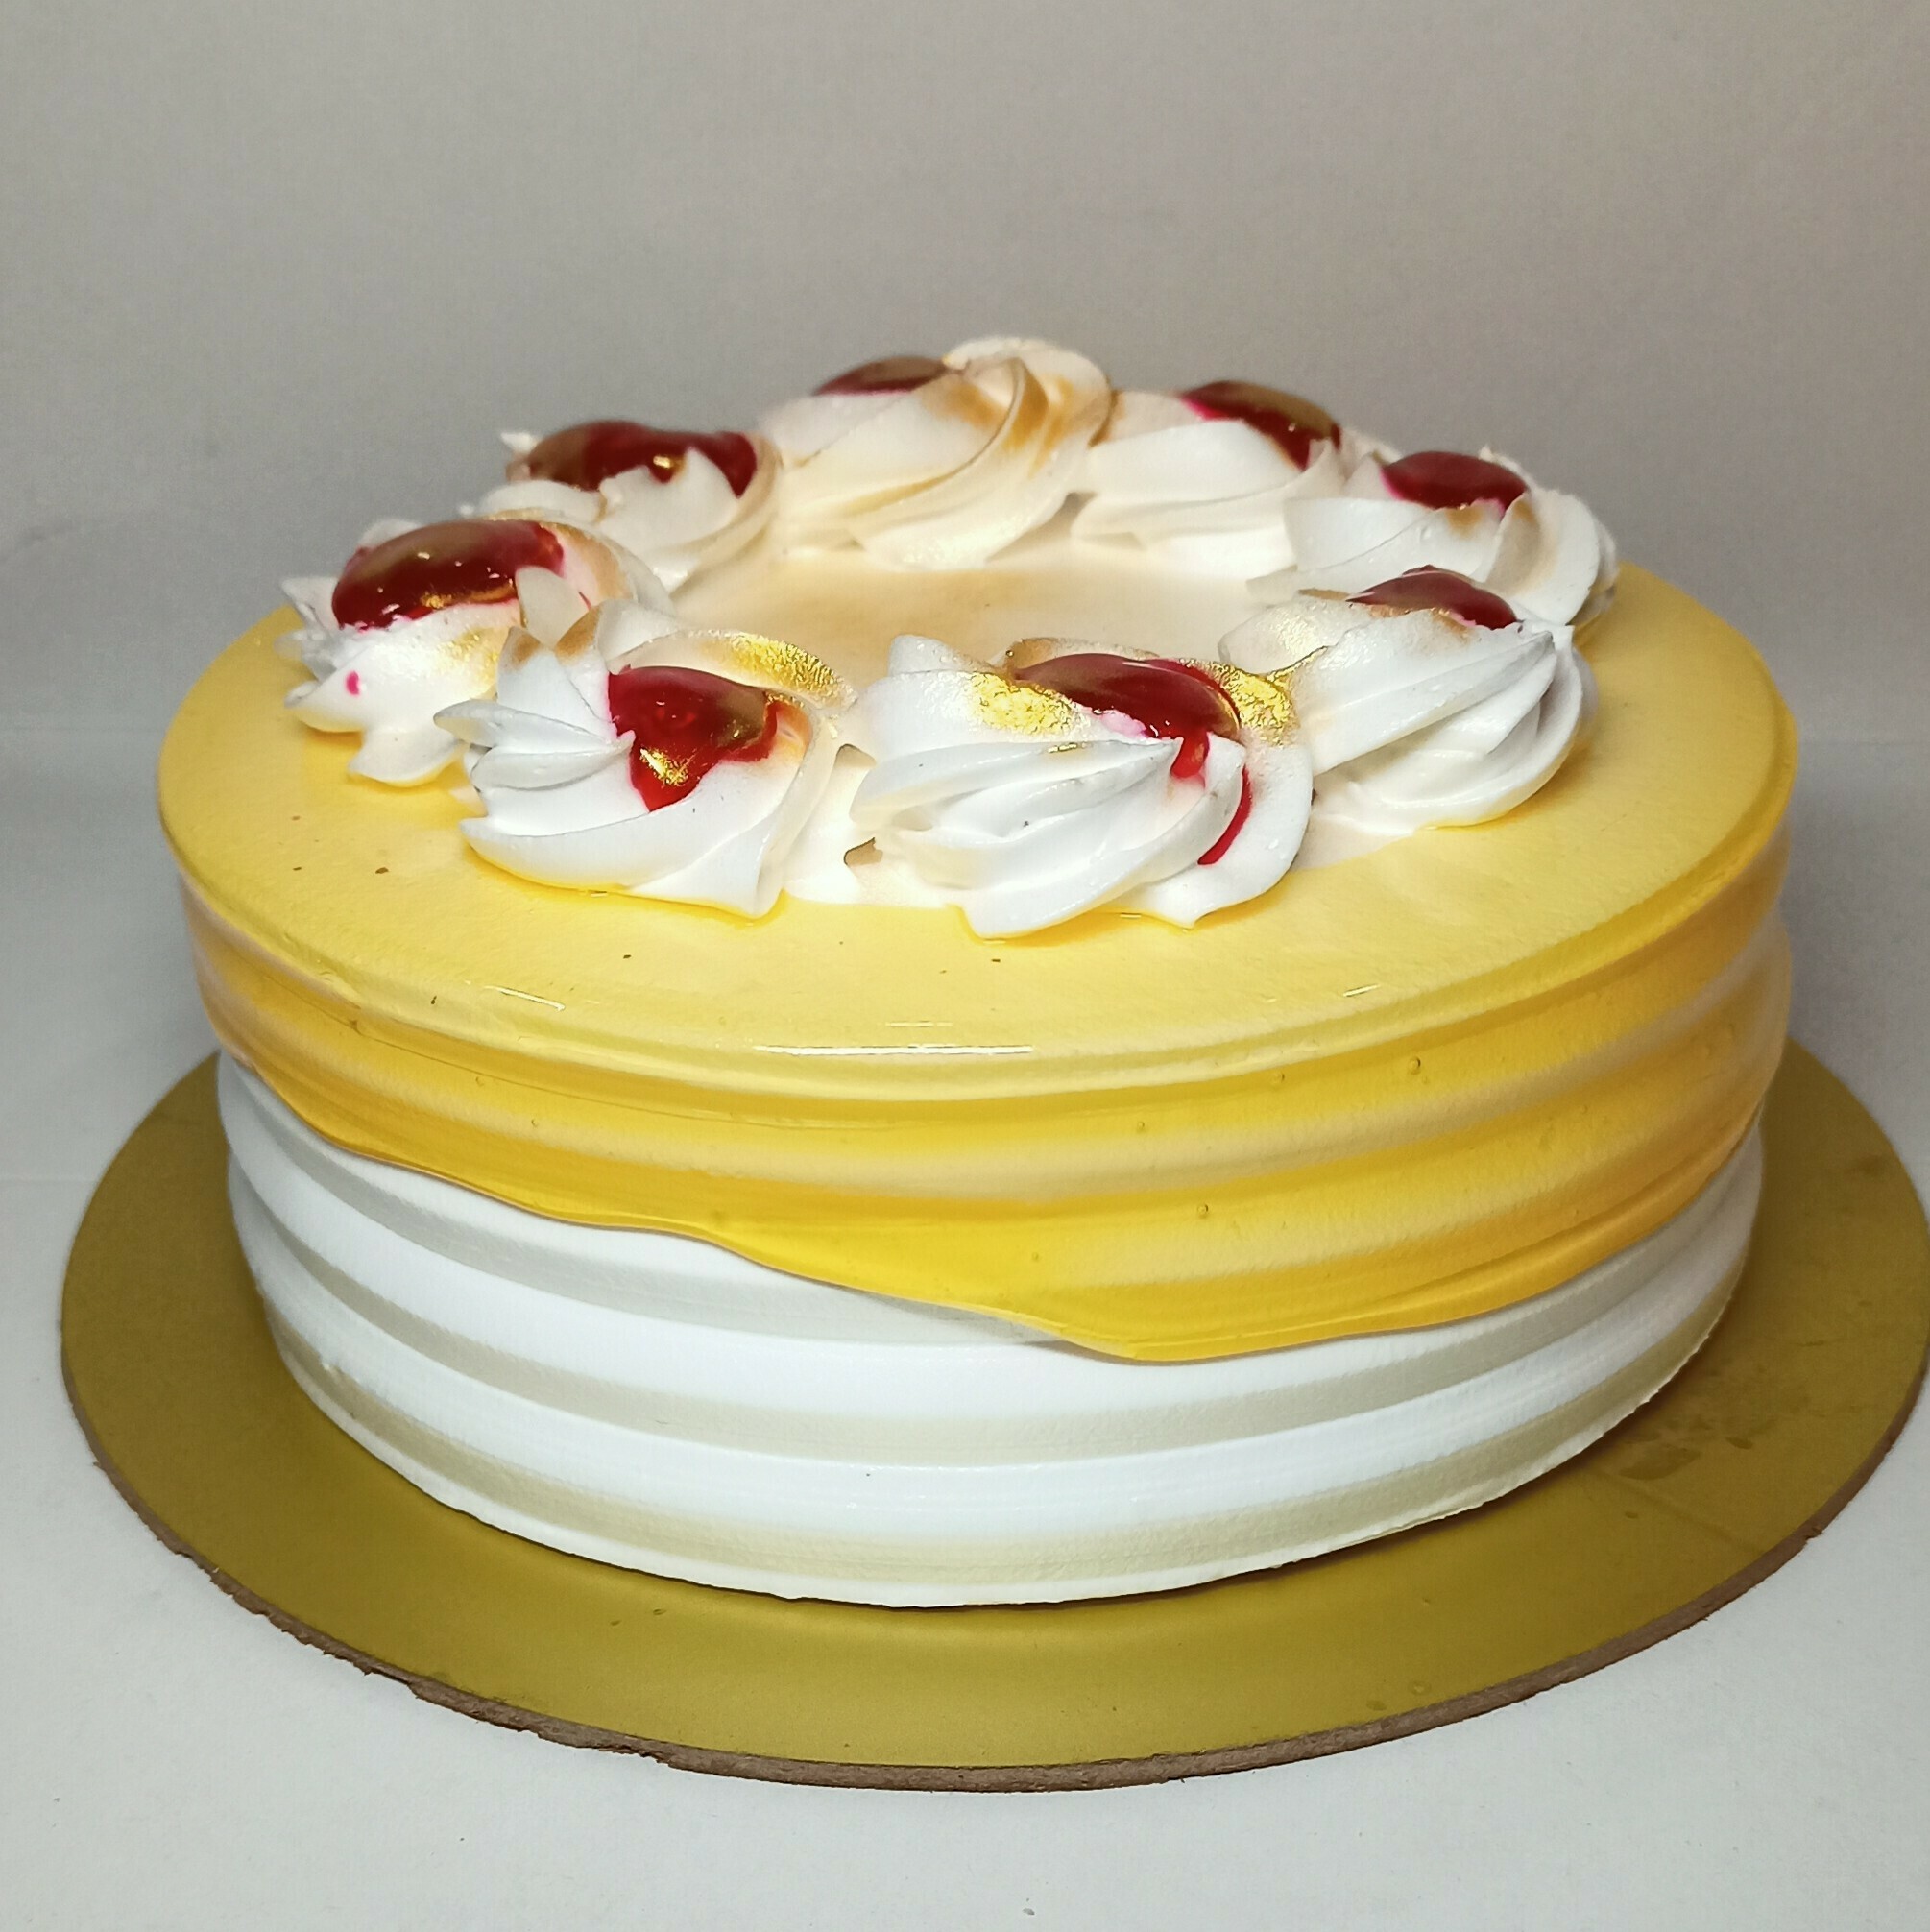 Butterscotch Pudding Cake delivered